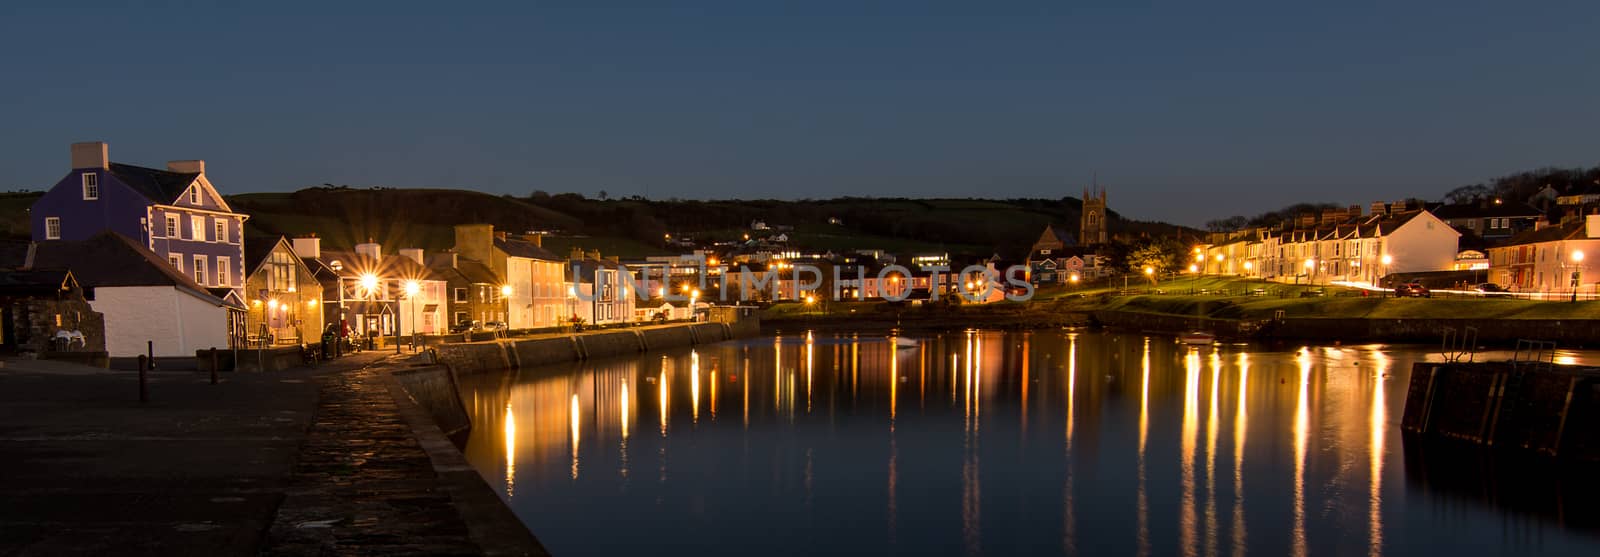 Quaint building overlooking a harbour at dusk, with lights reflecting on the calm water